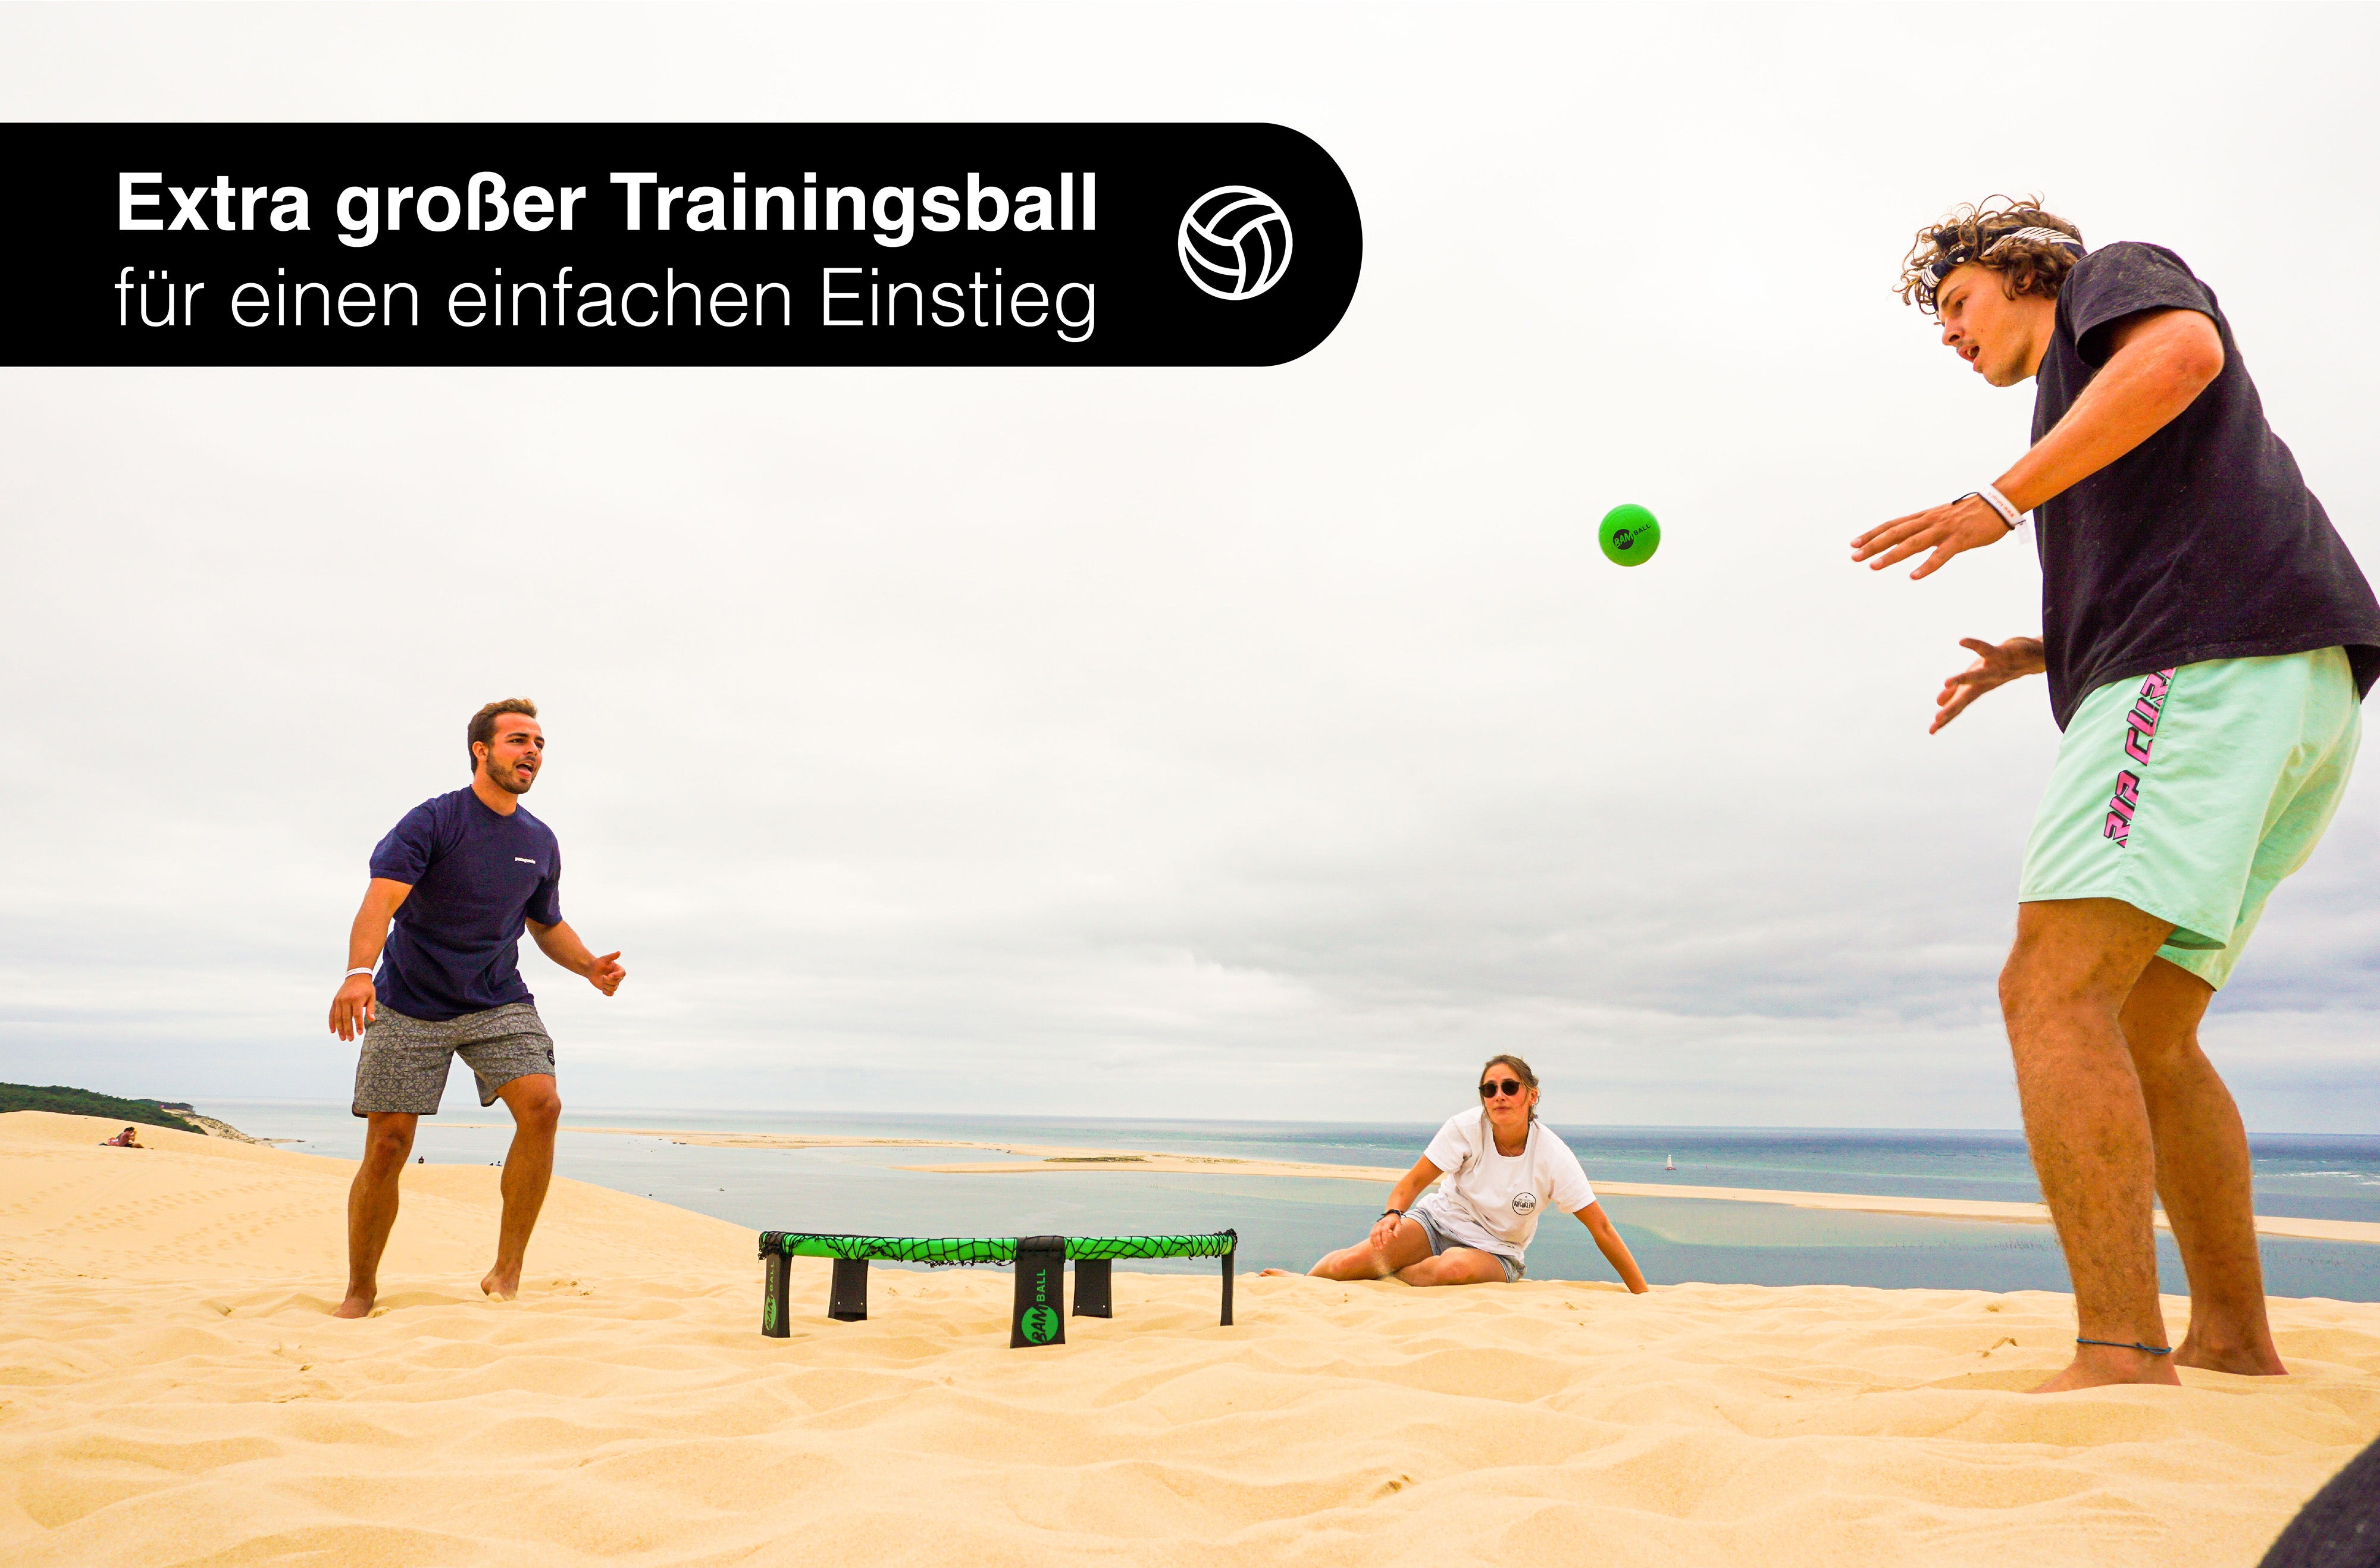 BamBall extra Trainings & Spielball Pack